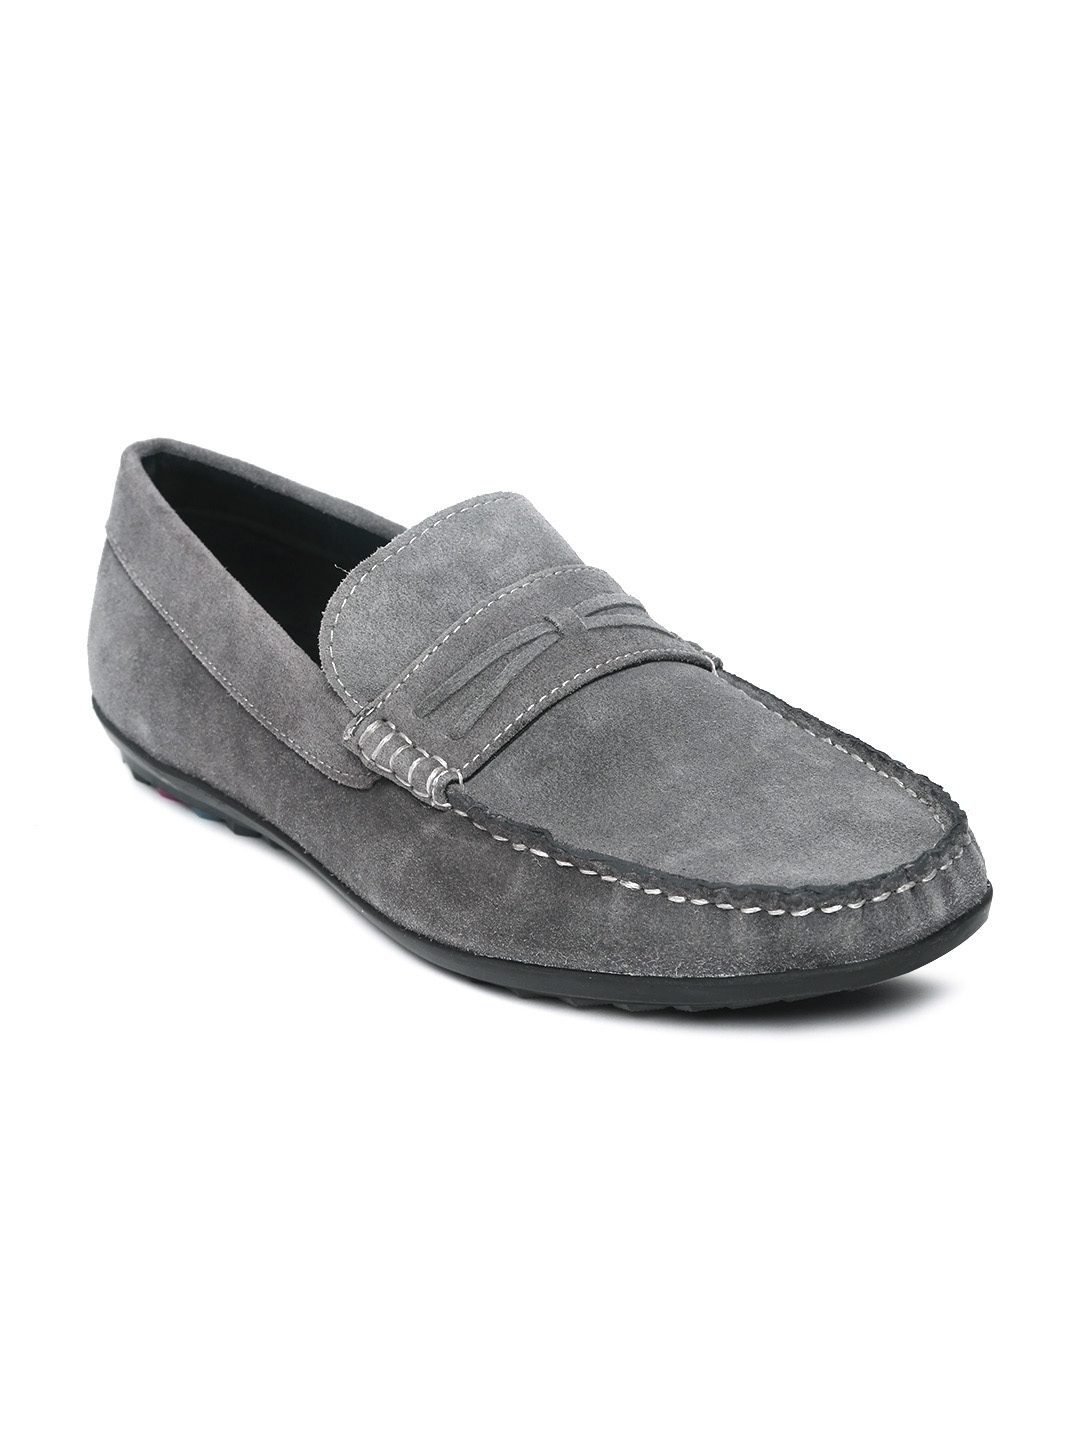 Buy Mast & Harbour Men Grey Suede Loafers - Casual Shoes for Men 562797 ...